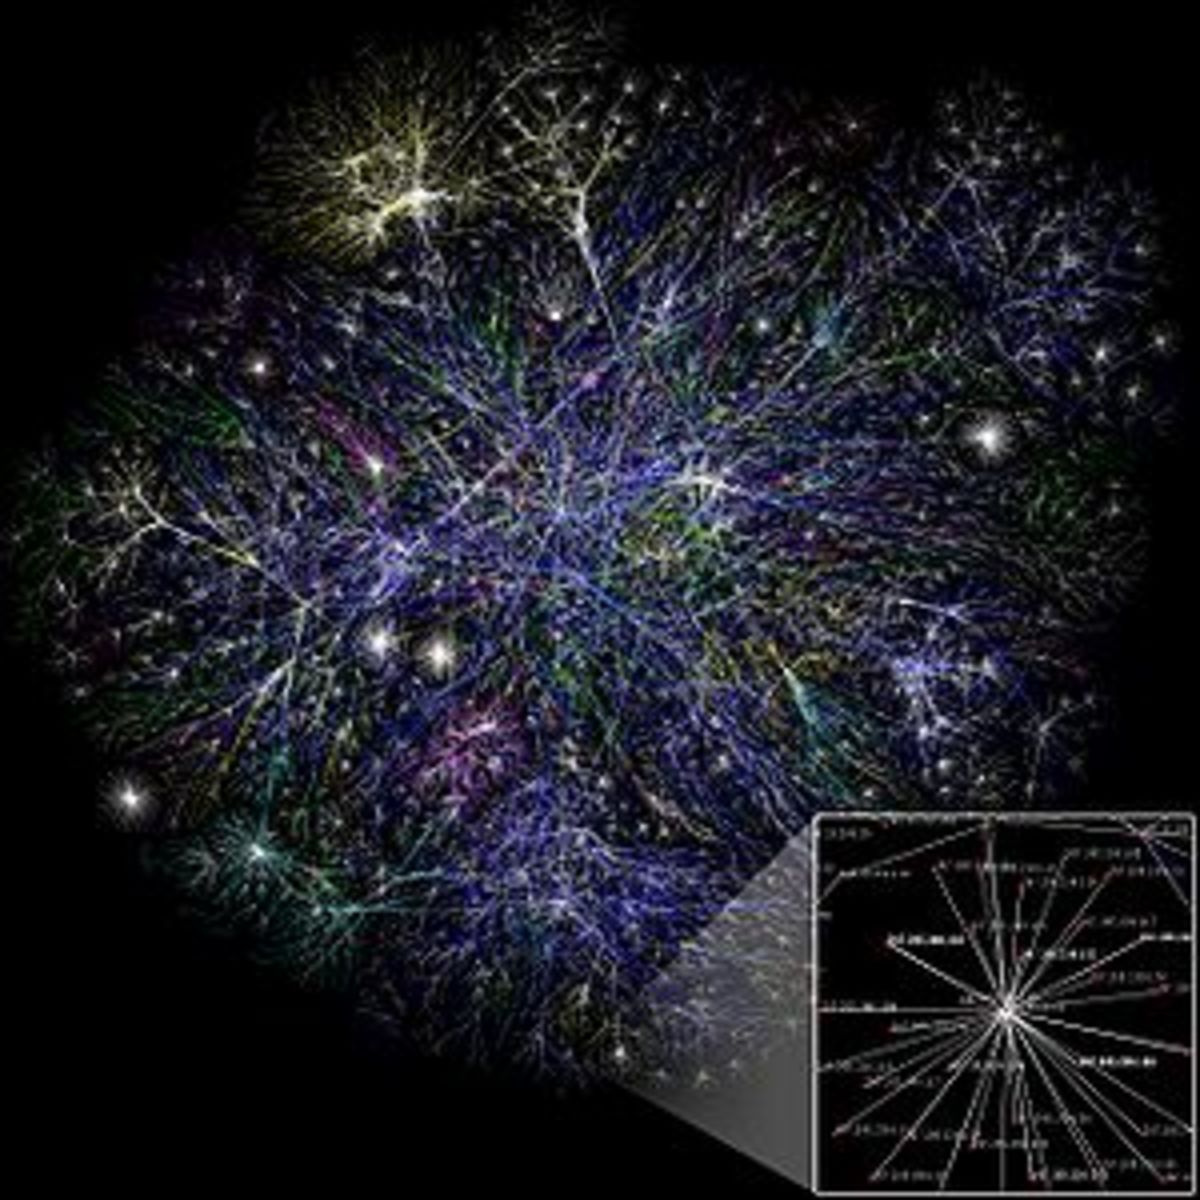 Internet Interconnectivity which mirrors the human nervous system